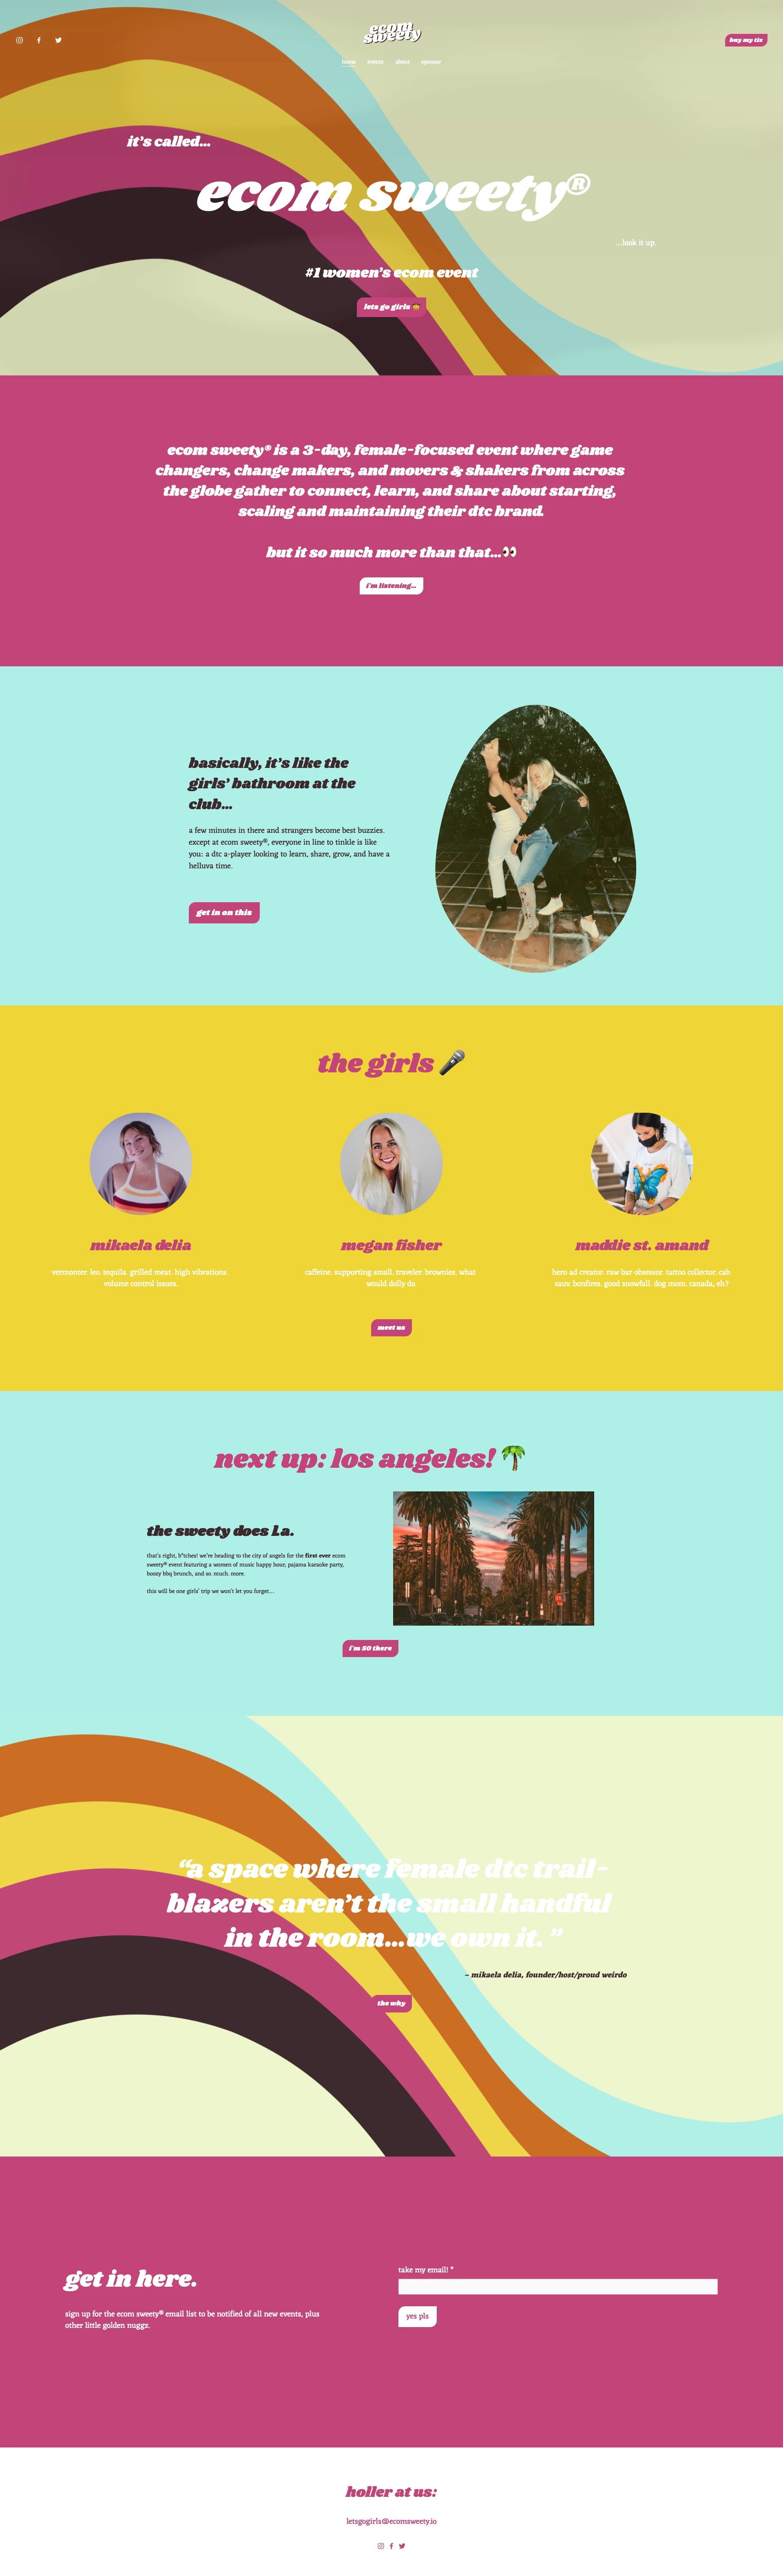 ecom sweety Landing Page Example: ecom sweety is a 3-day, female-focused event where game changers, change makers, and movers & shakers from across the globe gather to connect, learn, and share about starting, scaling and maintaining their dtc brand.